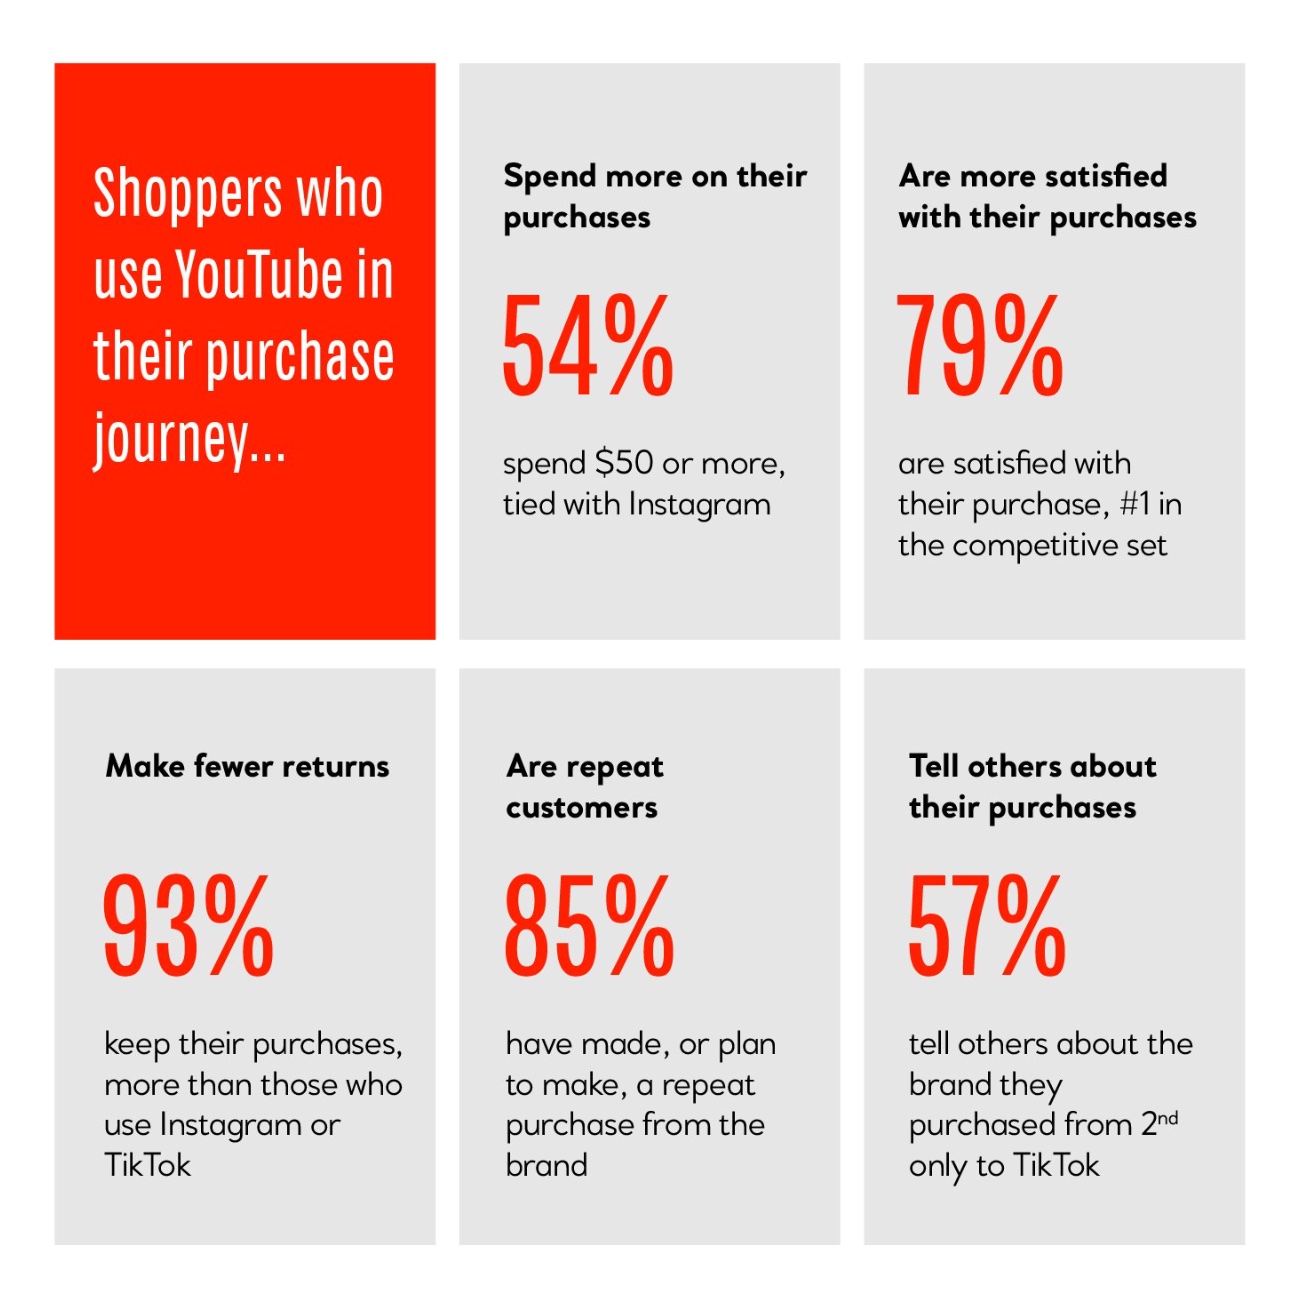 A Talk Shoppe survey   connected  YouTube users - results